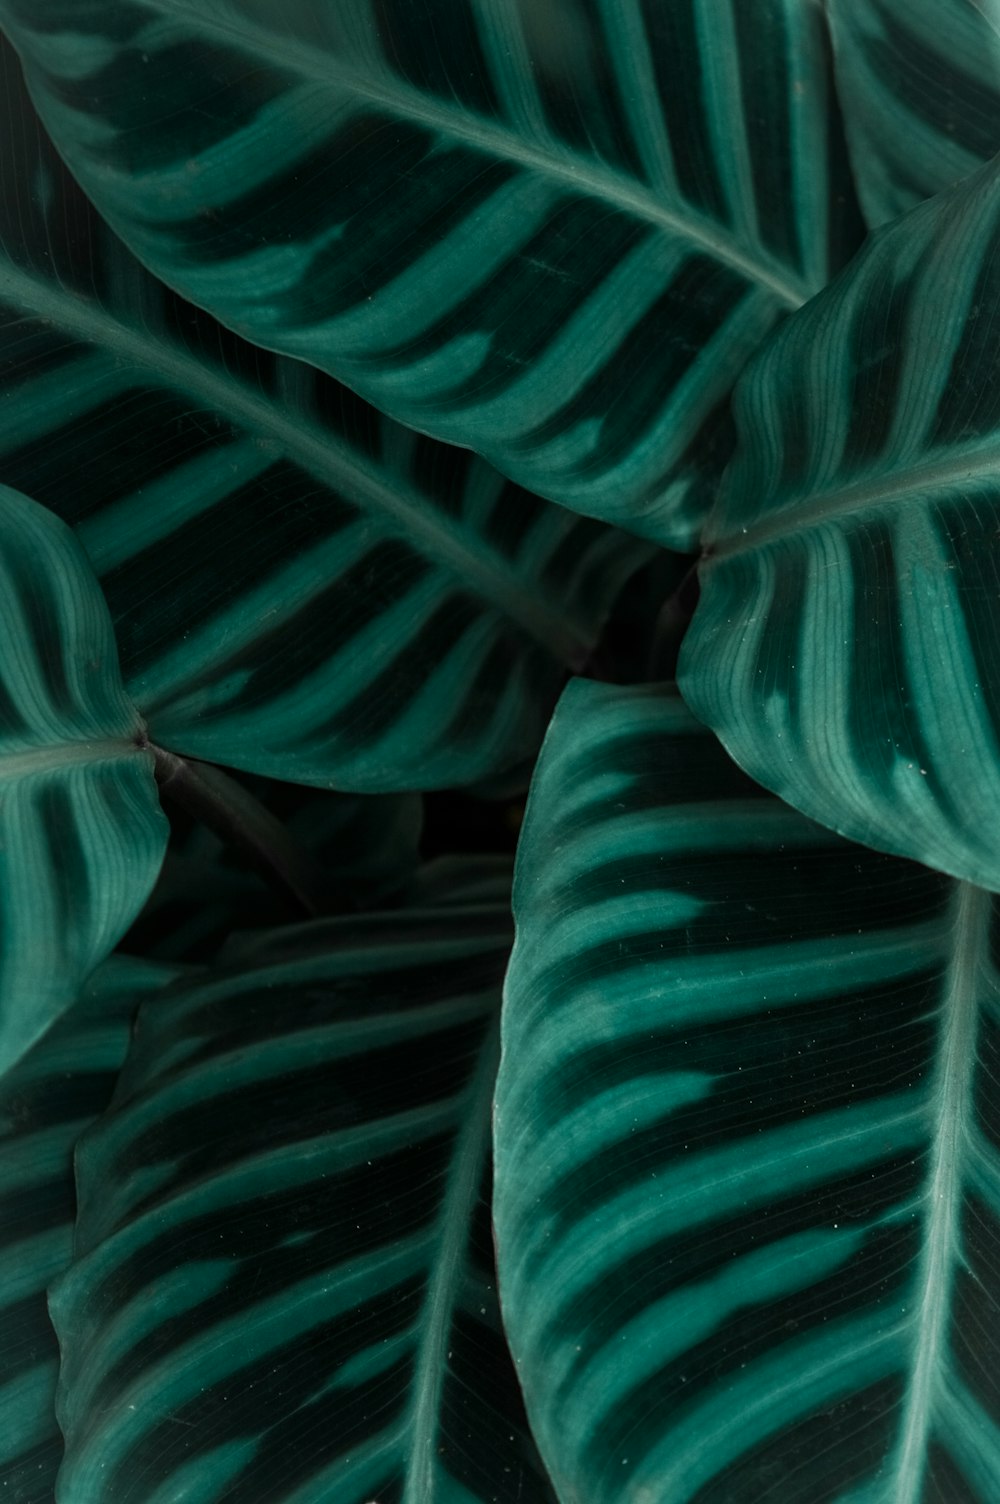 close-up photography of leaves